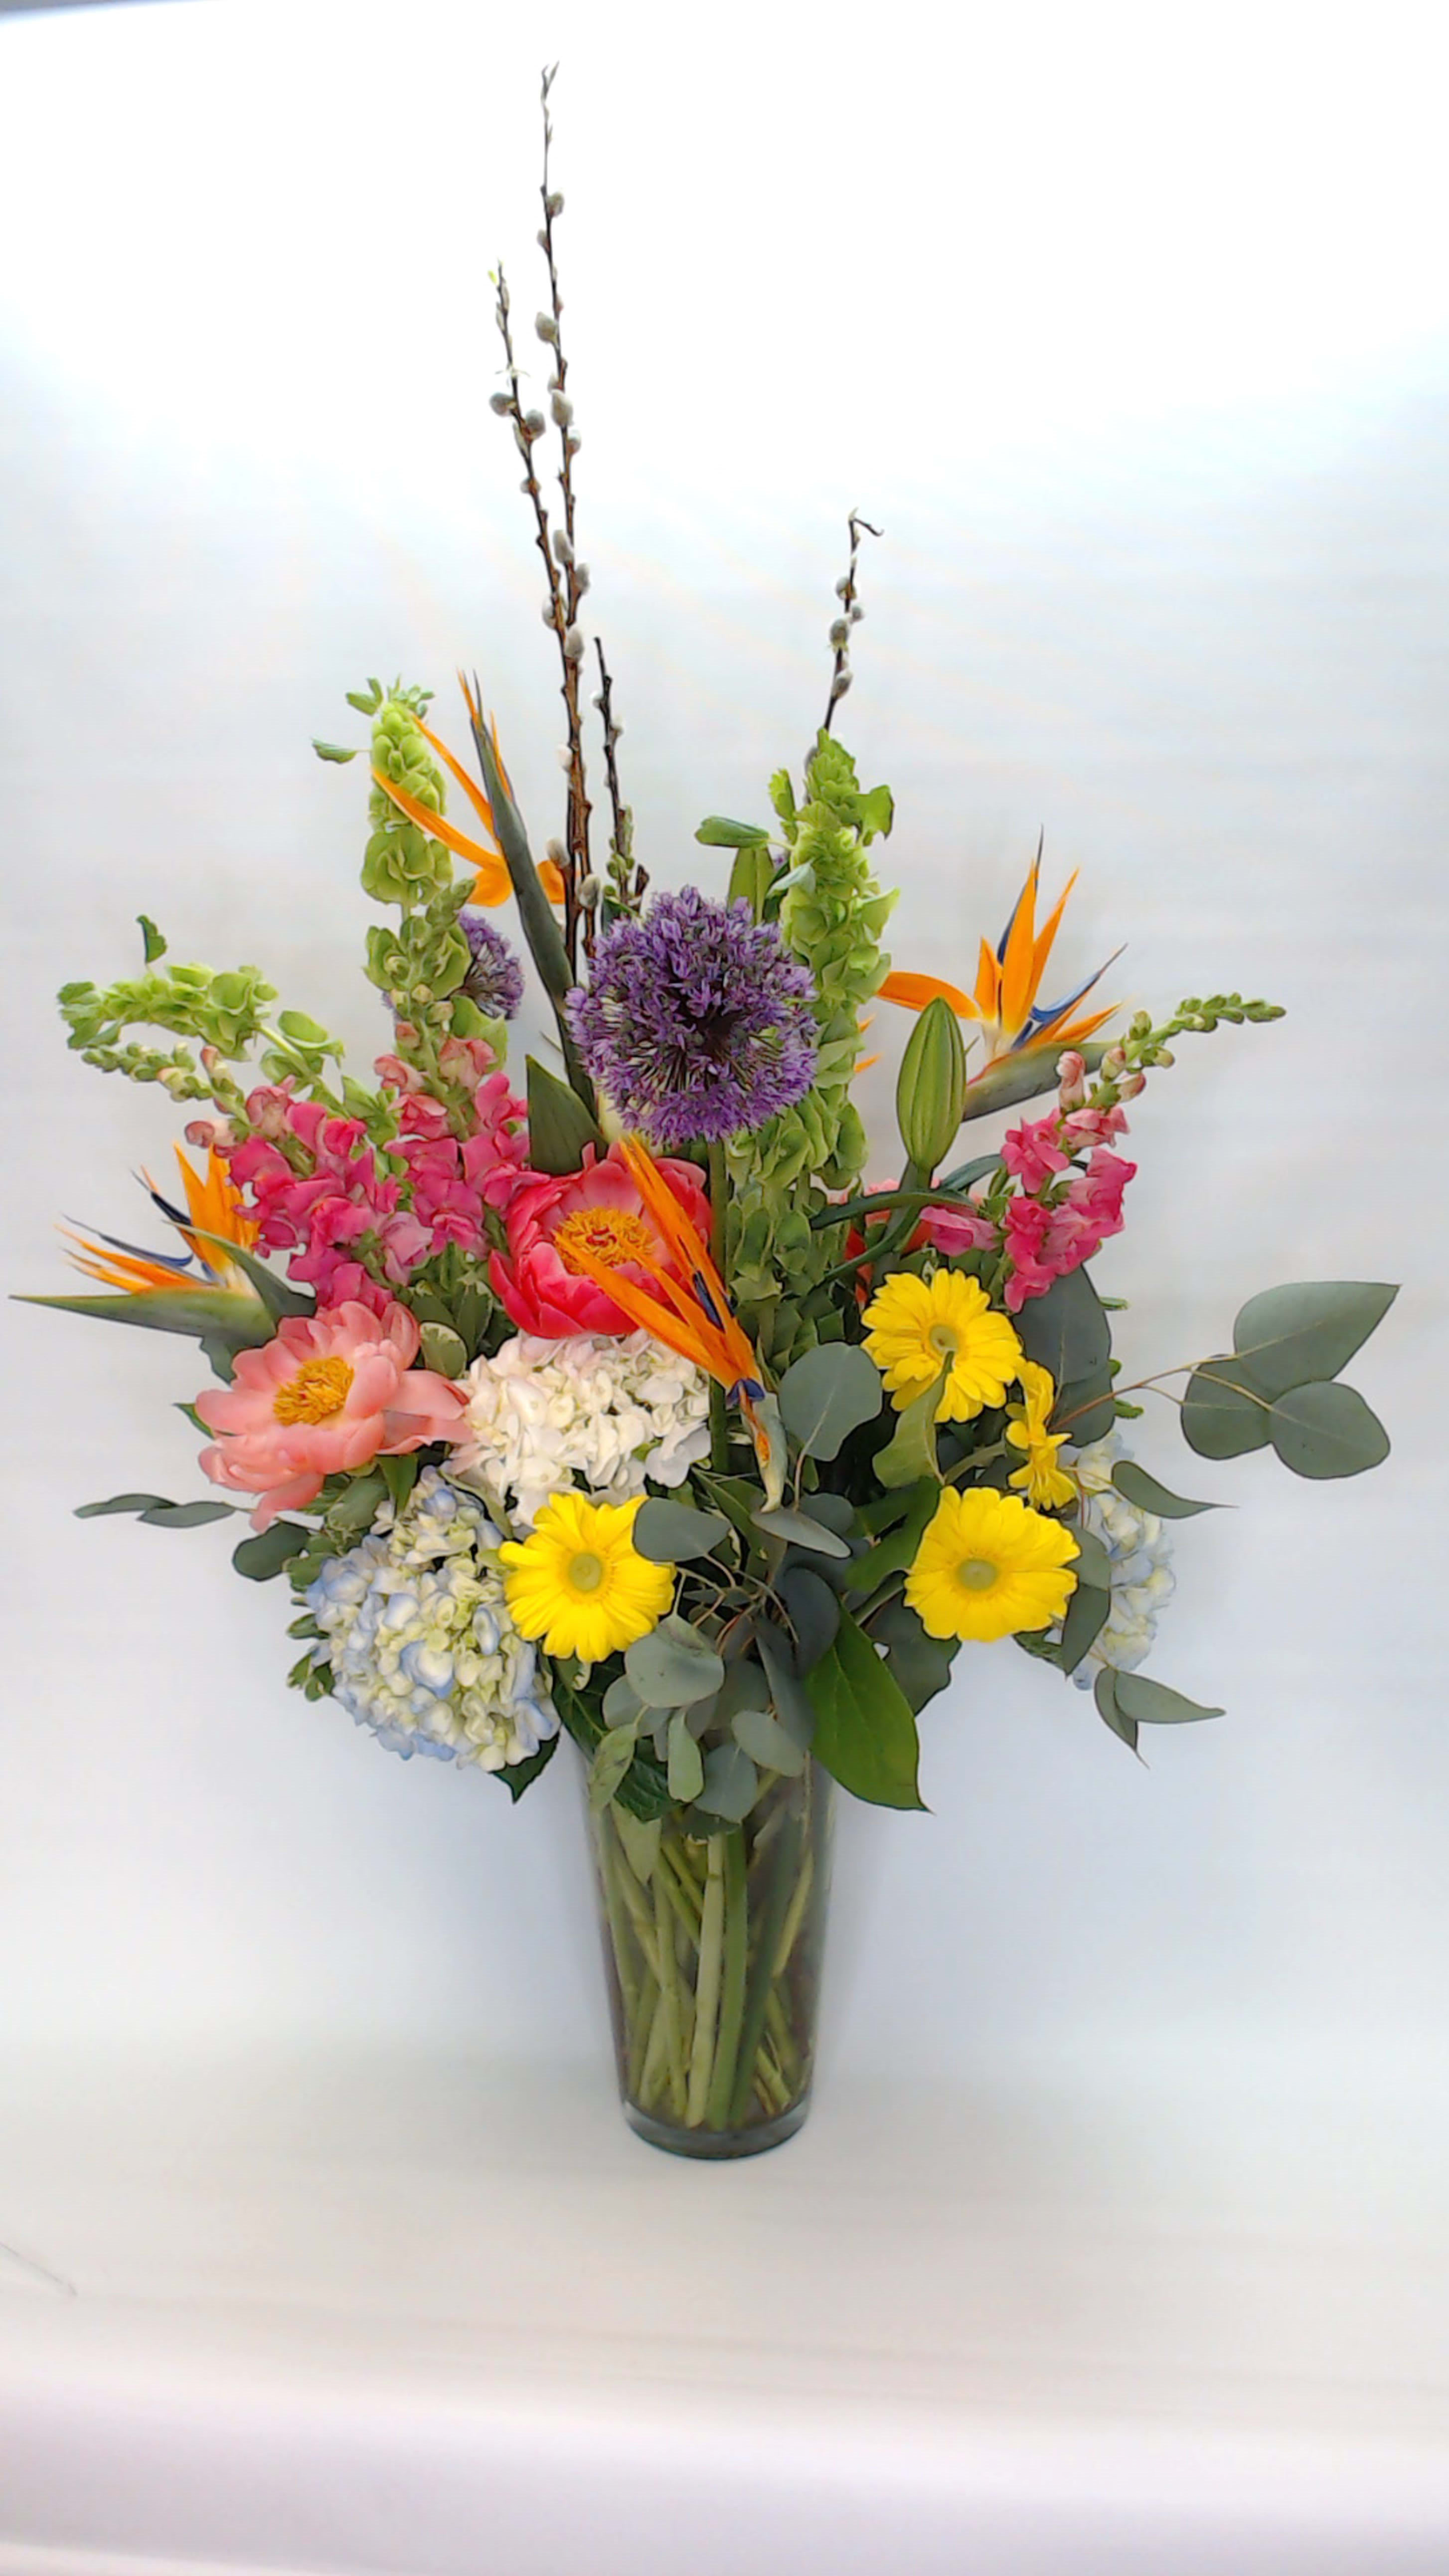 Spring into summer - A simple statement highlighting all the garden favorites. Gerbera daisies, hydrangea, roses, peonies, globe allium, birds of paradise. (Season may affect some flower availability) 